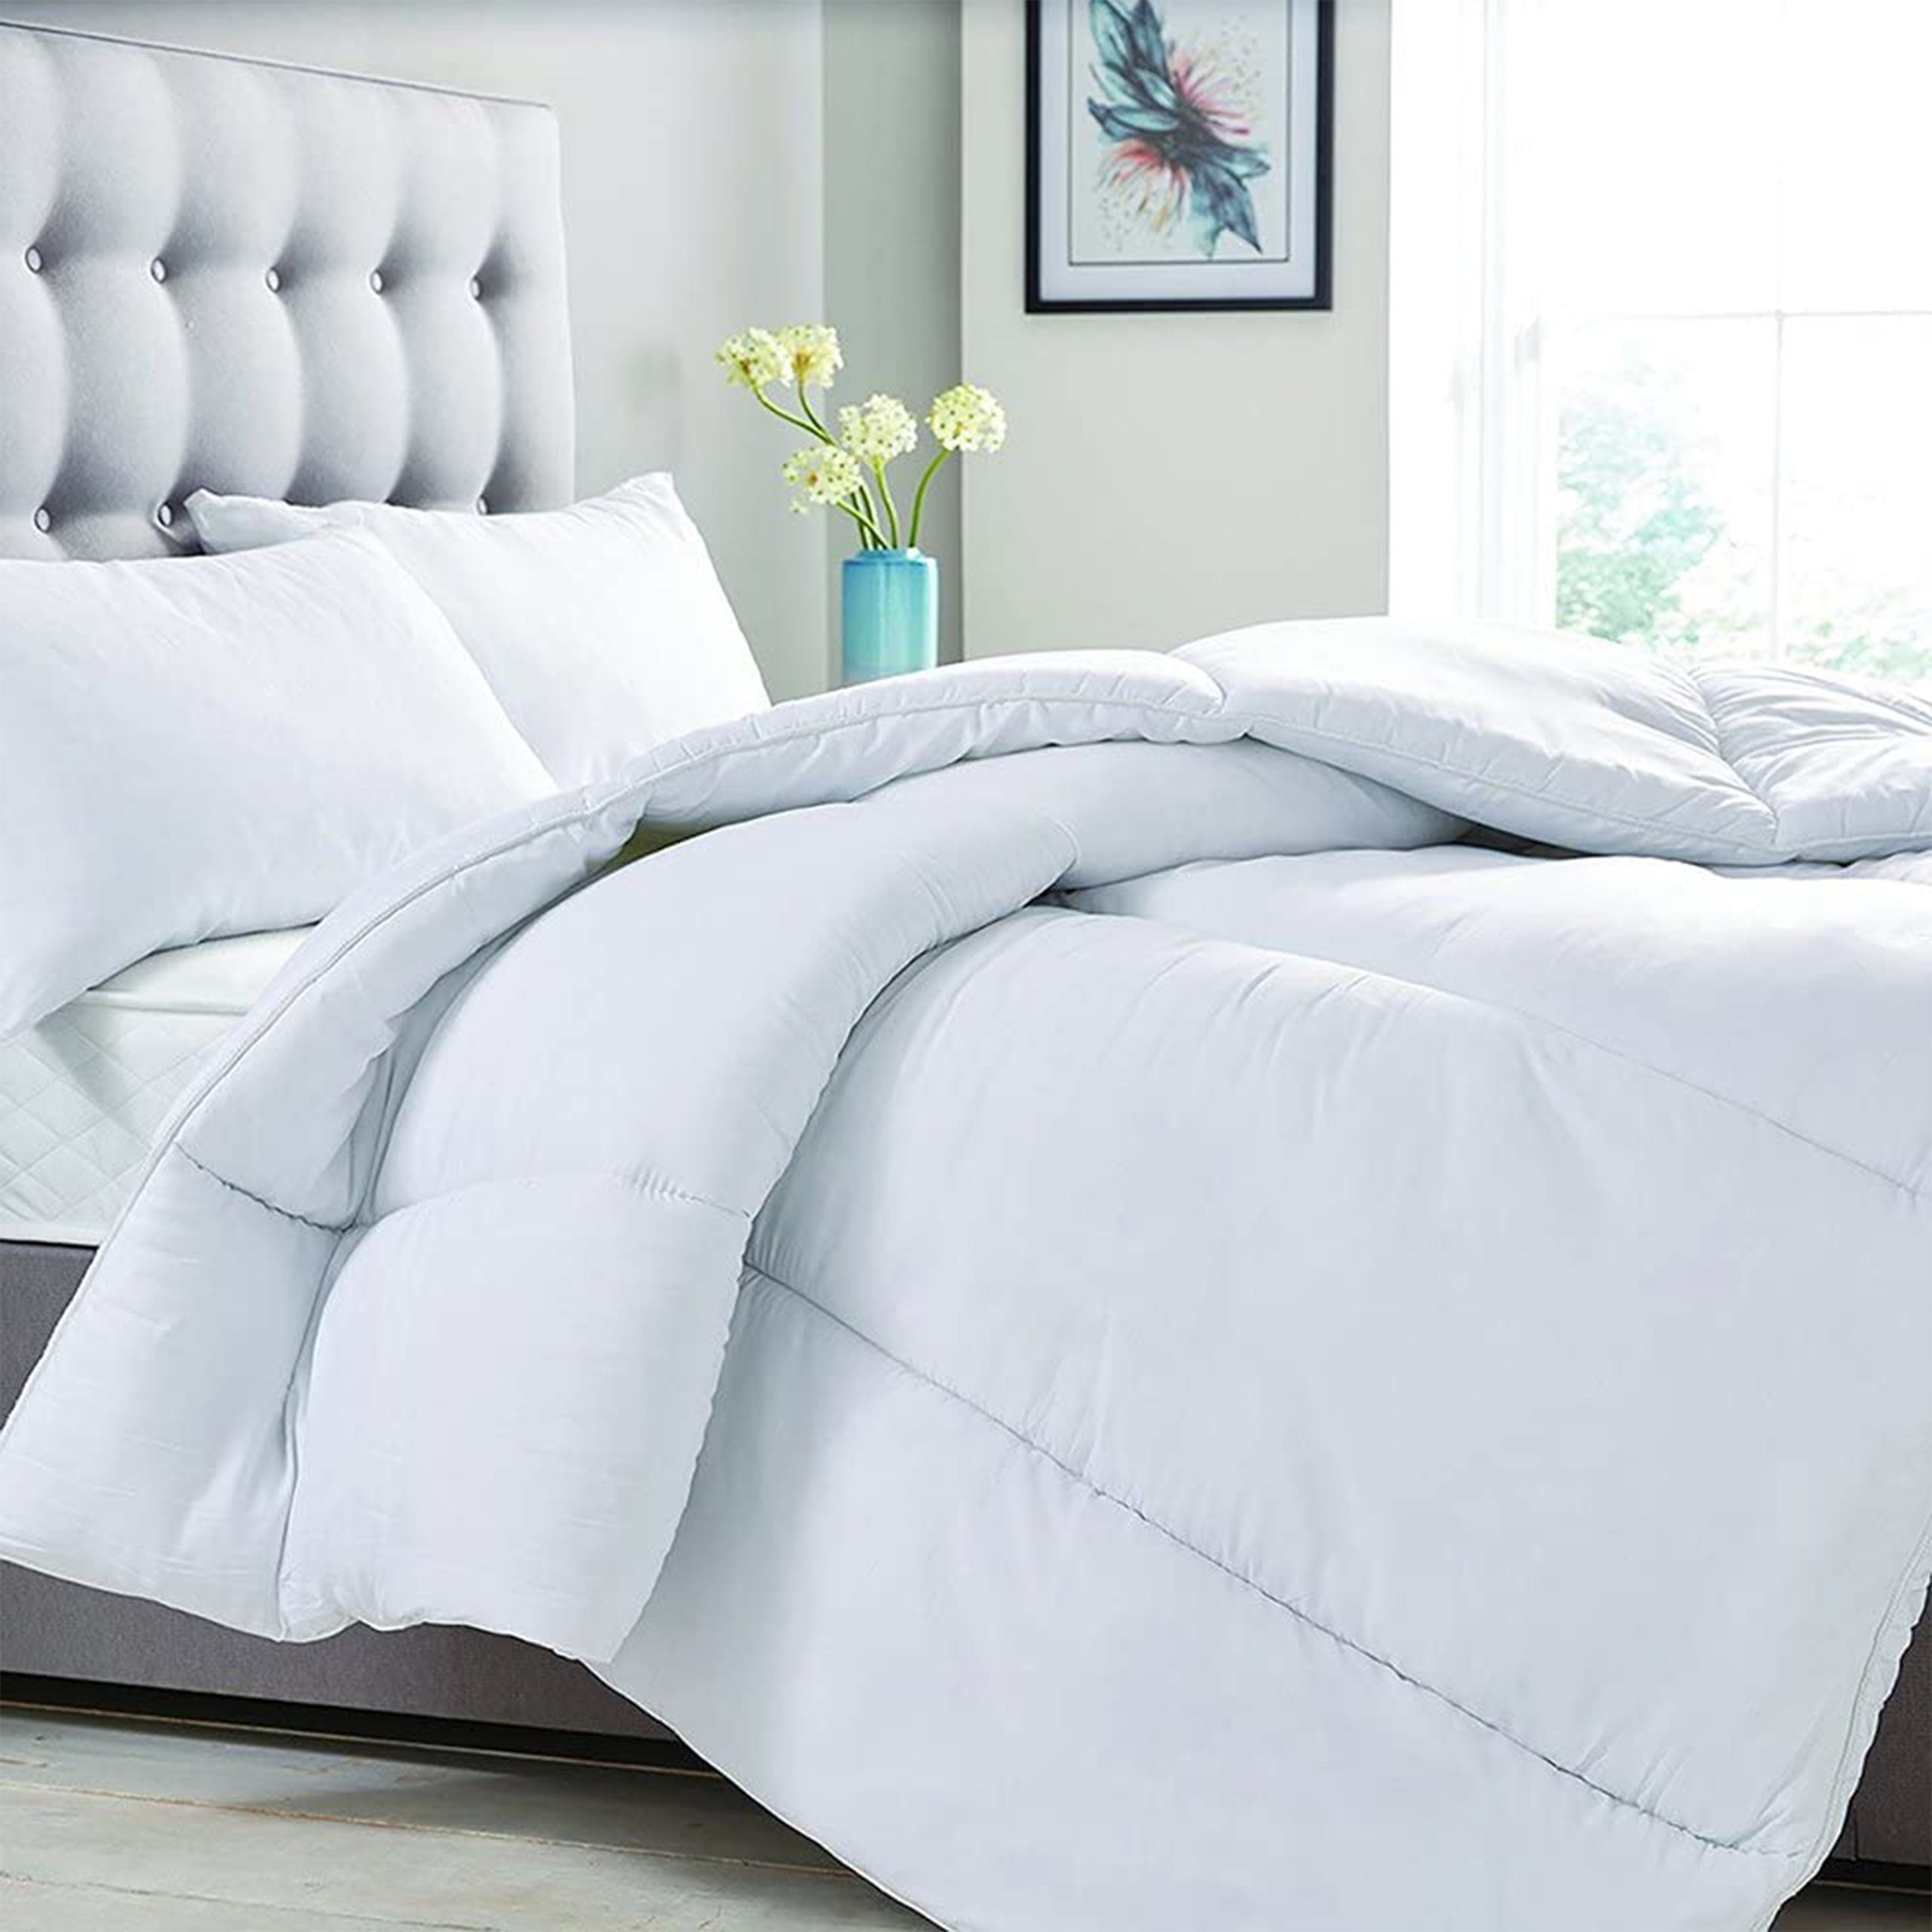 Snuggle up with the Cosy Home quilt. Each quilt comes filled with a special type of lightweight hollowfibre polyester. As the name suggests, each strand of polyester is hollow, which traps air inside and retains heat. This synthetic filling is perfect if you or your family suffer from allergies and react badly to natural filled duvets. With a maximum 15 tog rating, this duvet is the absolute highest you can buy and is designed to keep heat in, which is perfect for winter. Fully machine washable this quilt is a dream to care for.